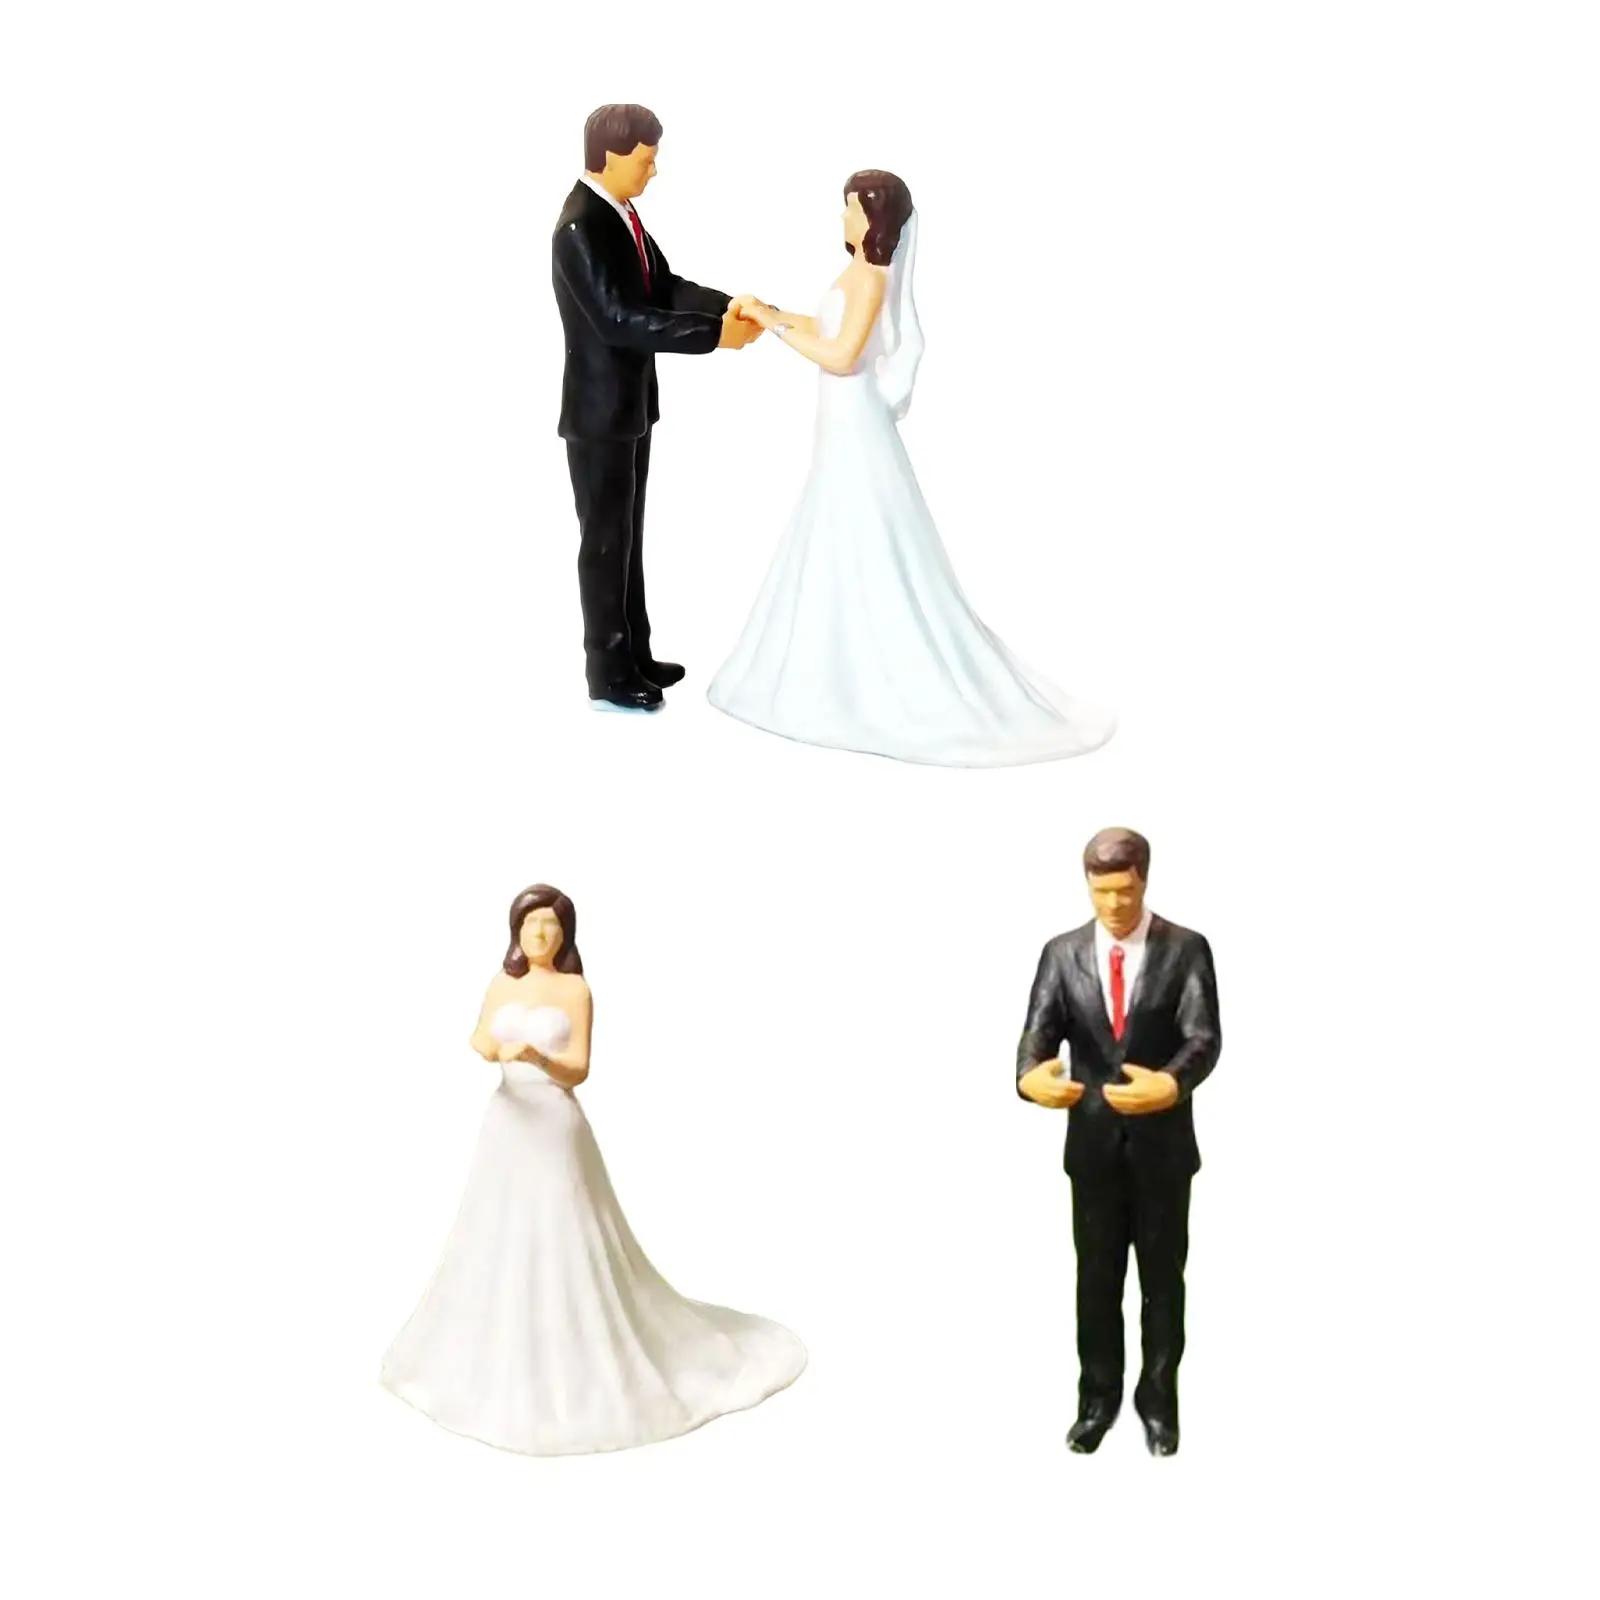 Resin 1/64 Wedding Figures Miniature Scenes Dioramas S Scale Collections Desktop Ornament DIY Projects People Model Layout Decor